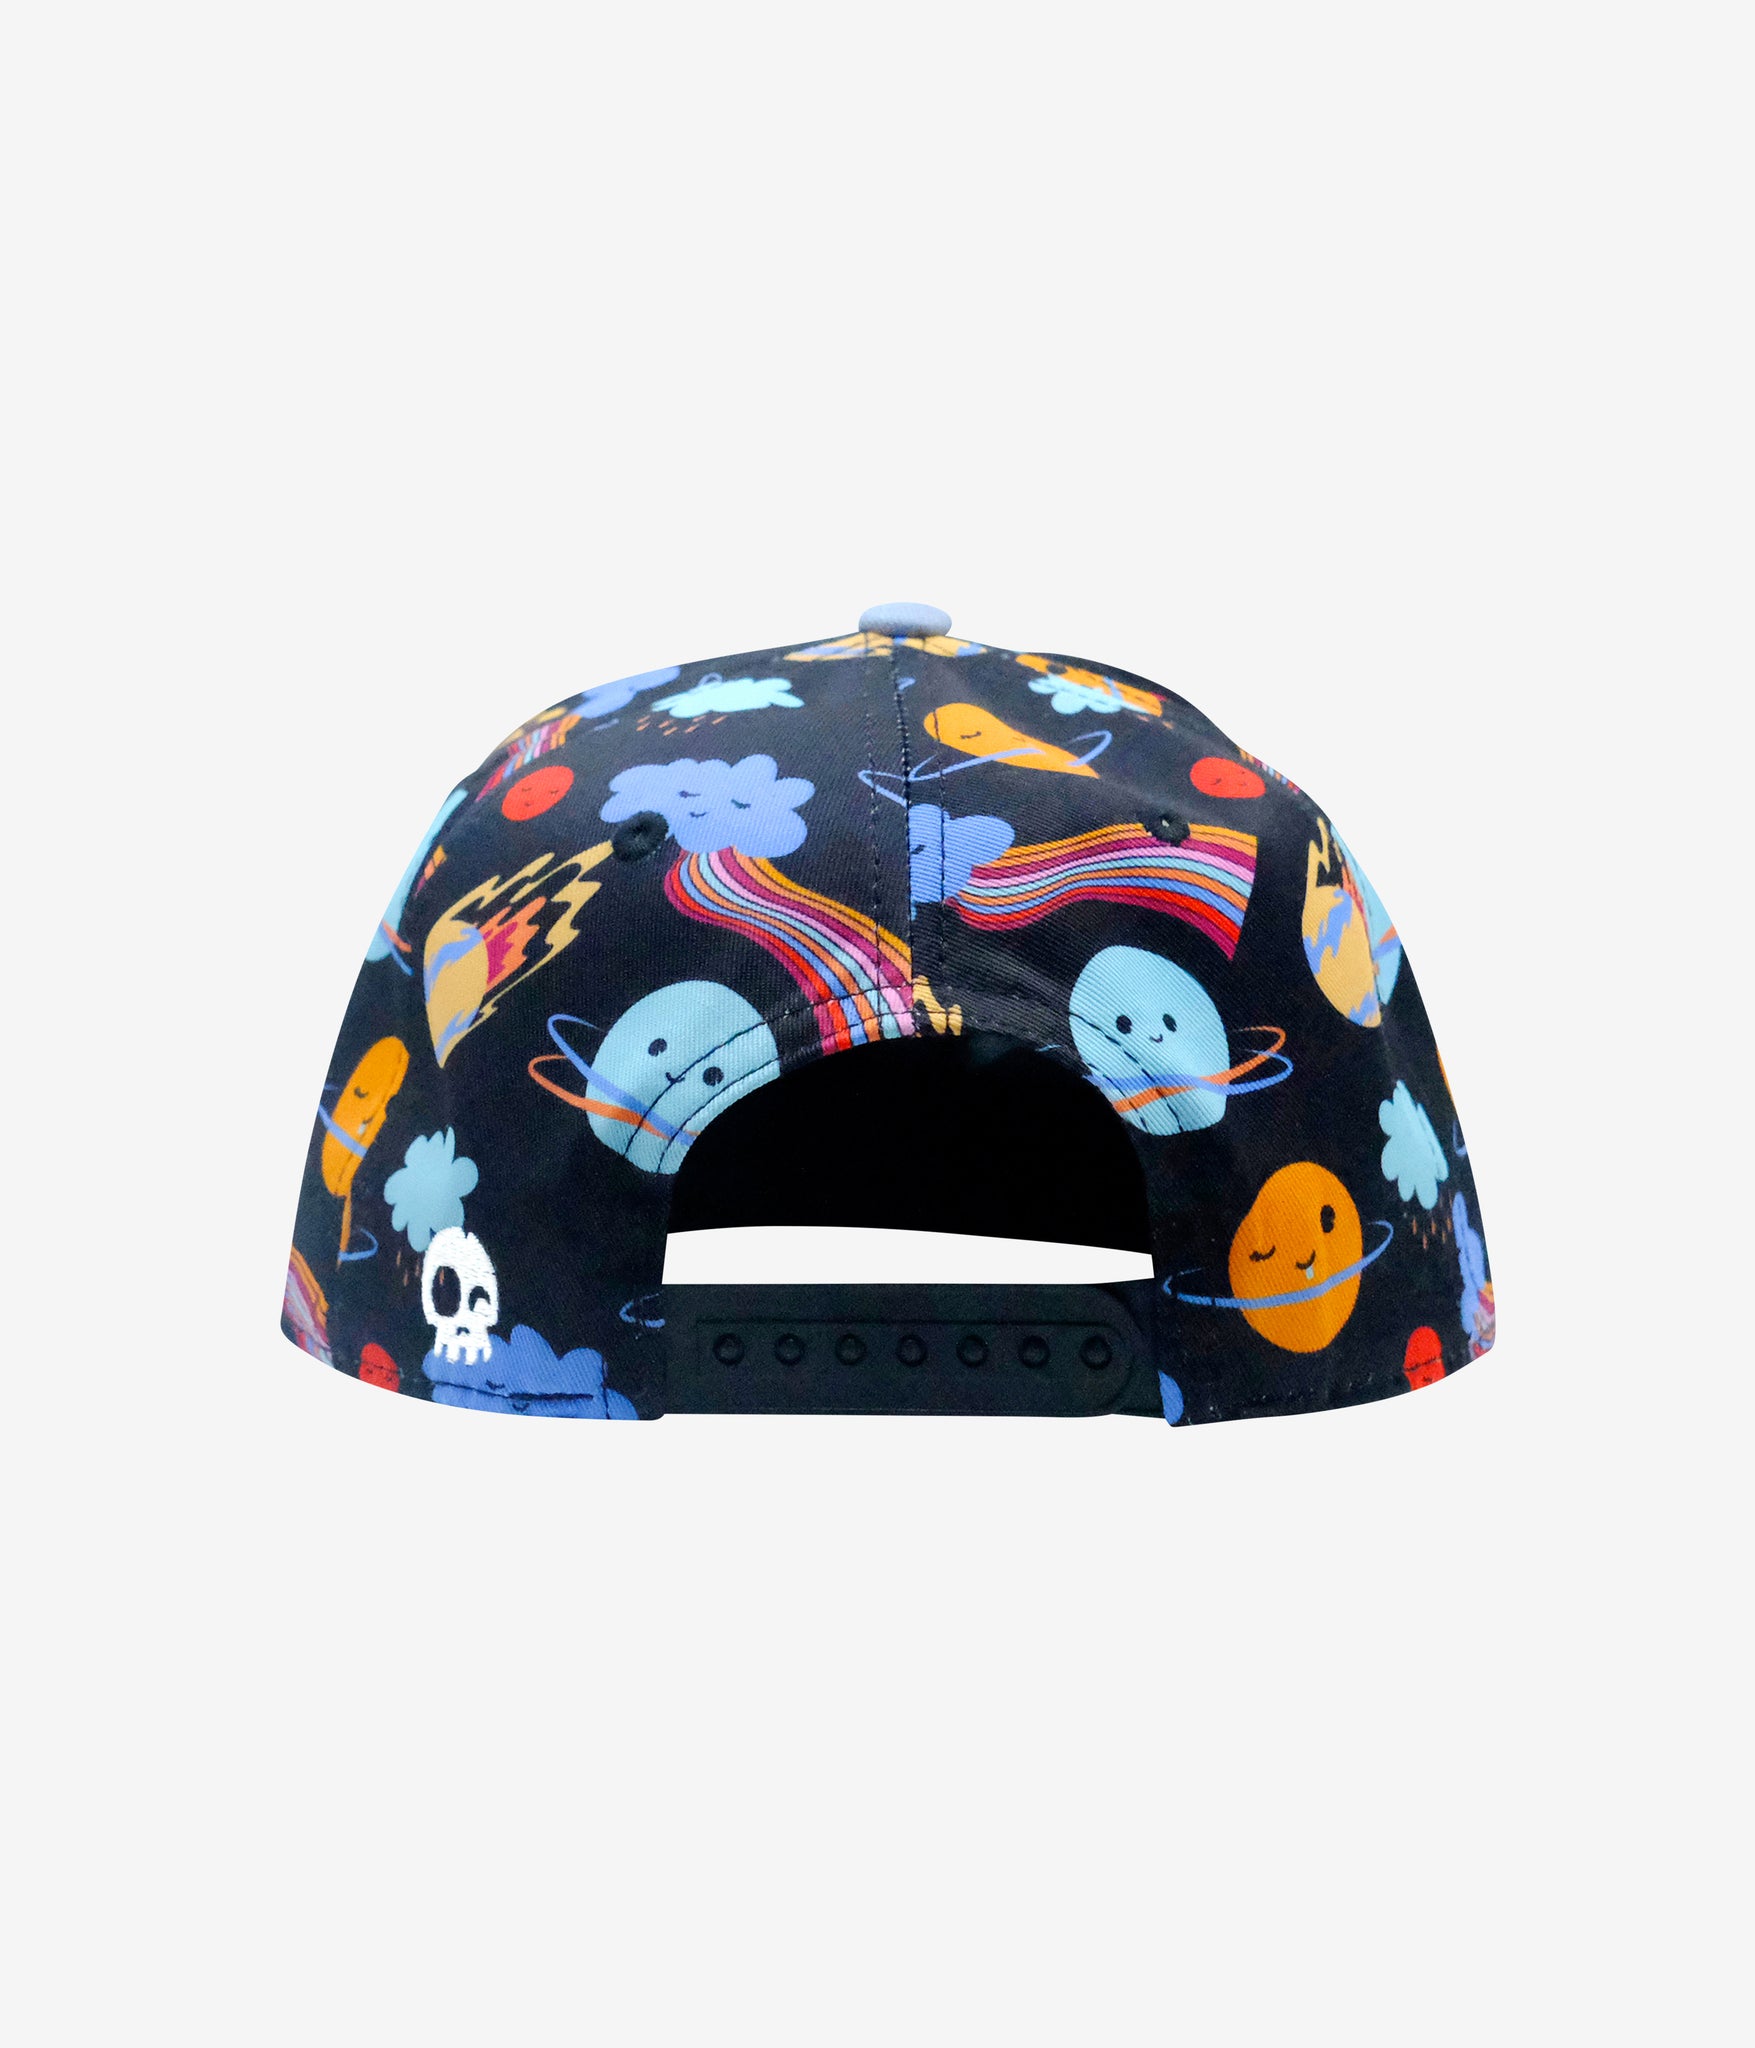 Another Planet Snapback - black